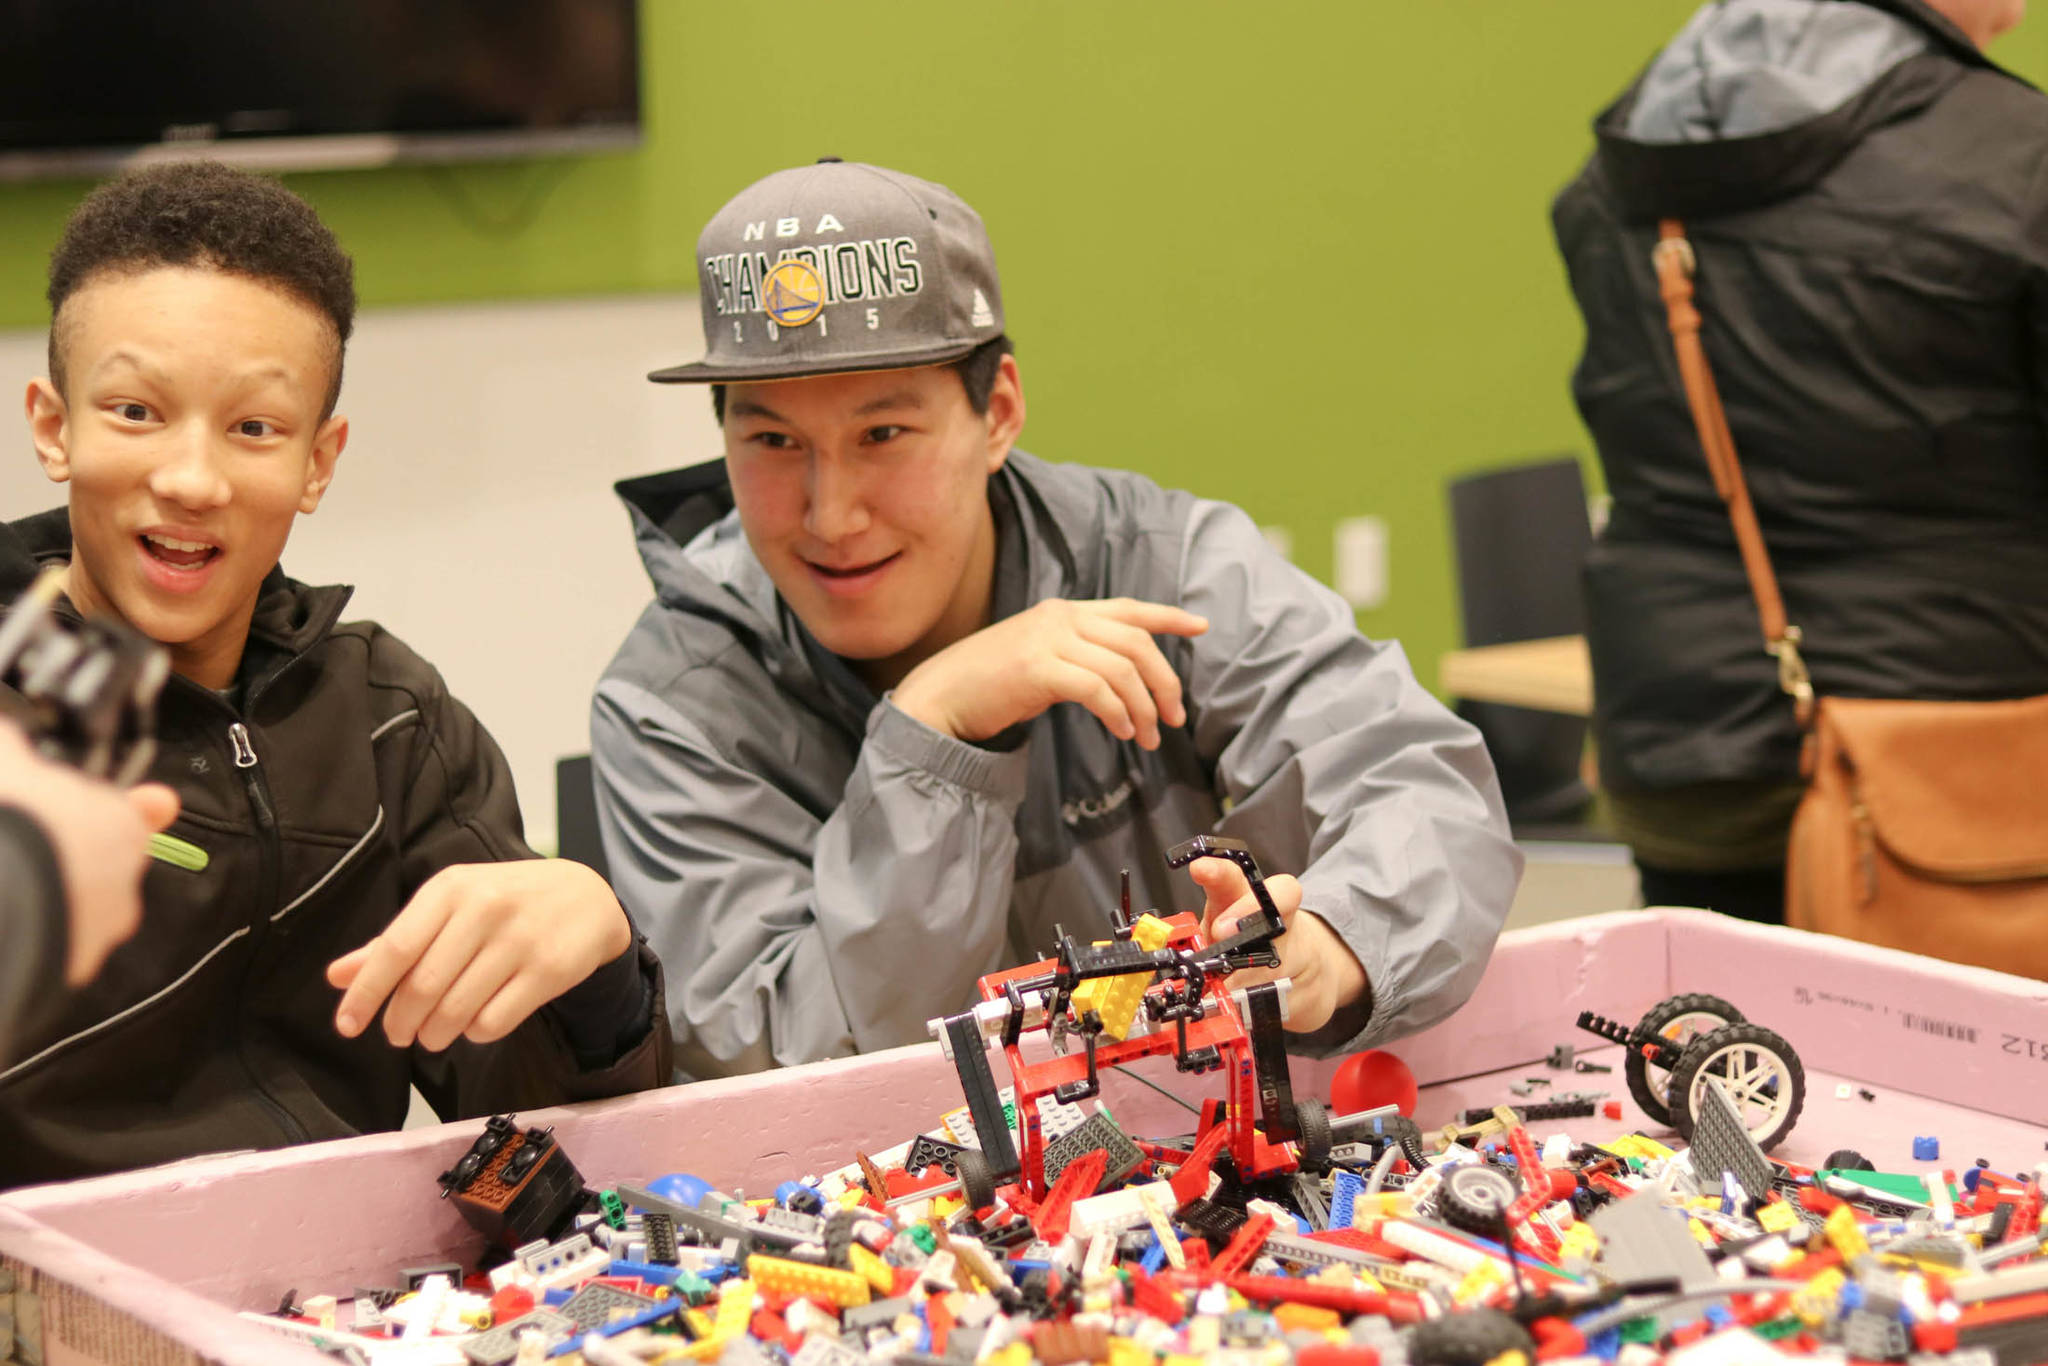 Joshua Walker, 14, and Byron Dock, 17, enthusiastically take part in the LEGO building challenge Saturday afternoon. Photos by Erin Laughlin | For the Capital City Weekly